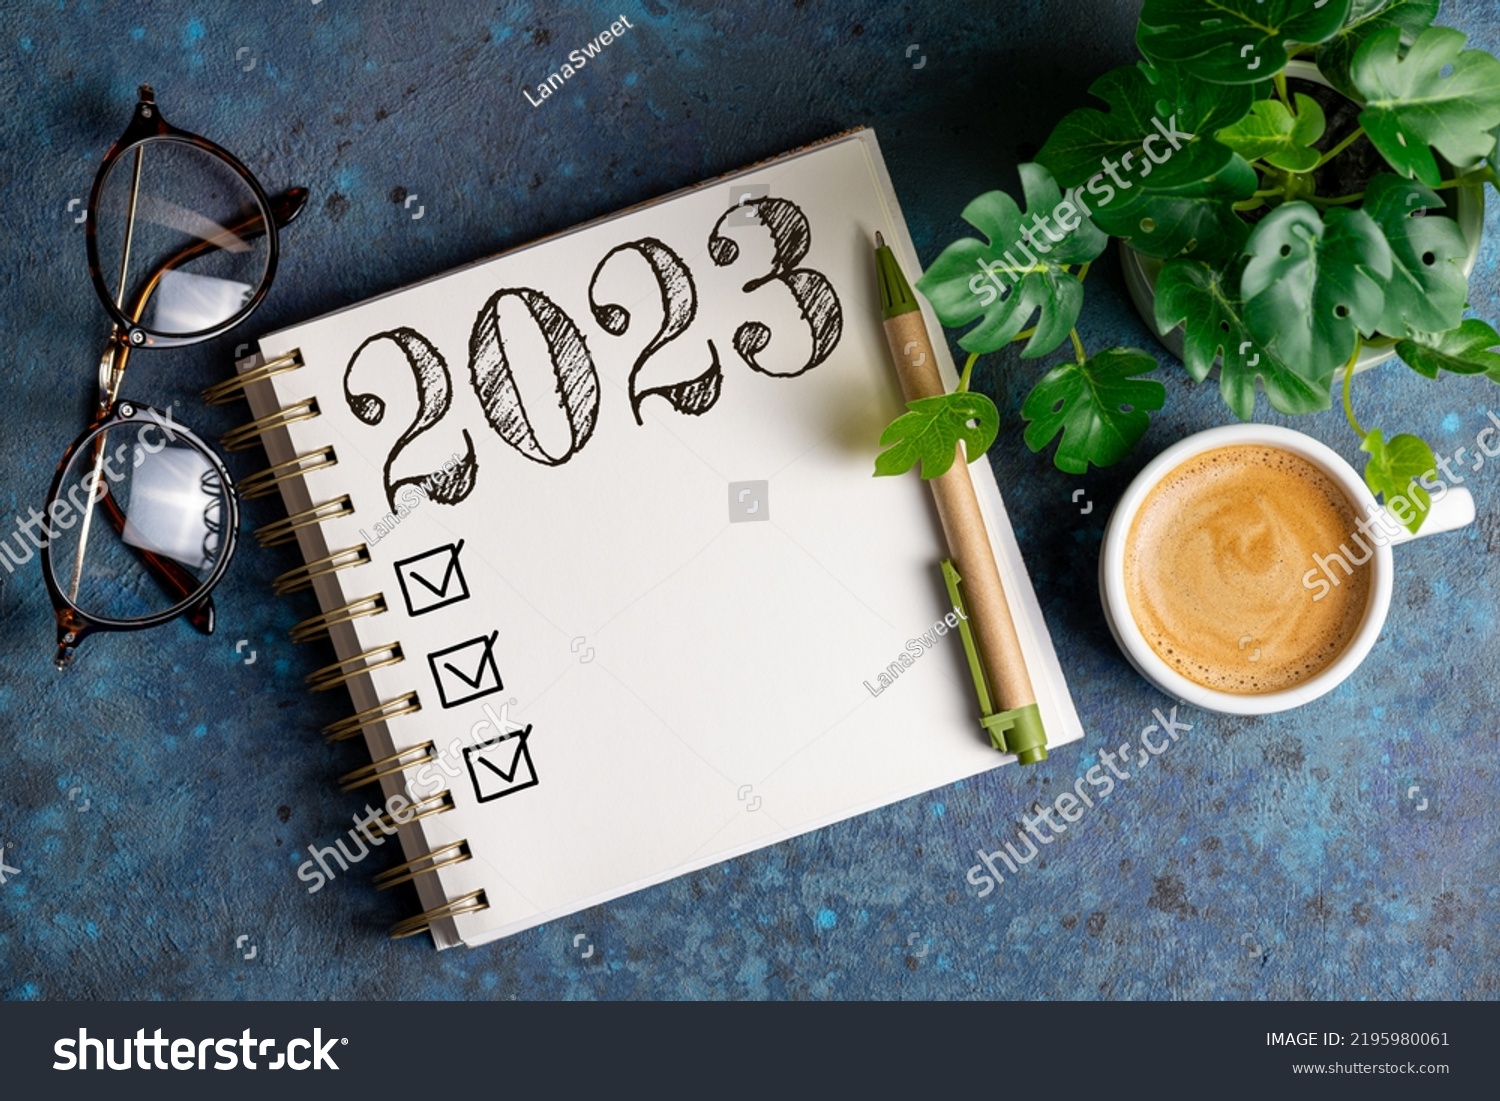 New year resolutions 2023 on desk. 2023 resolutions list with notebook, coffee cup on table. Goals, resolutions, plan, action, checklist concept. New Year 2023 template, copy space #2195980061